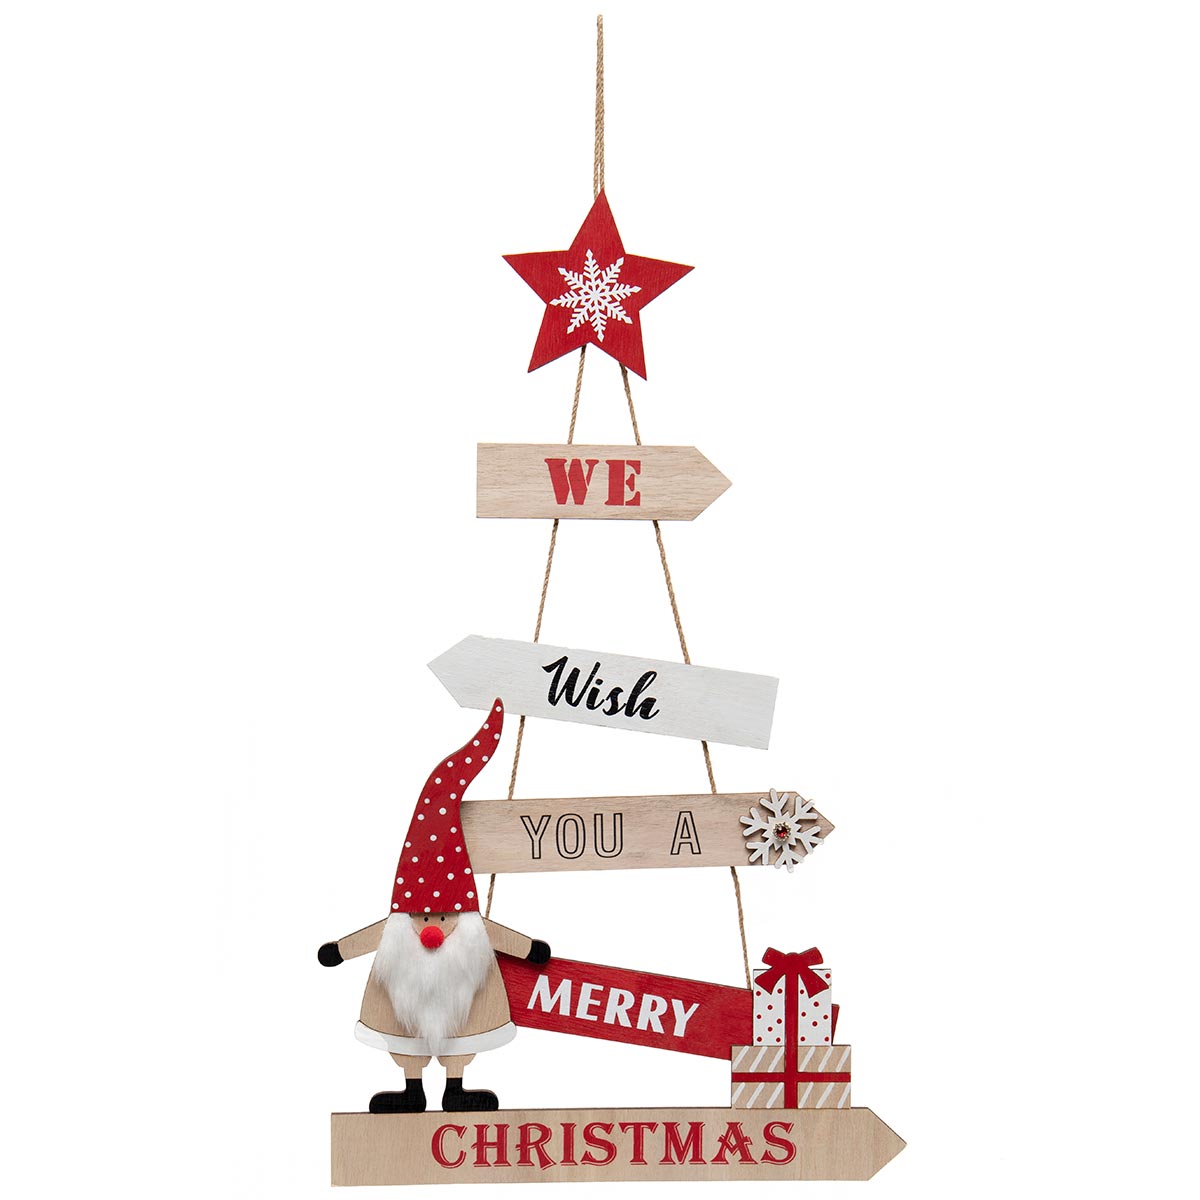 !WE WISH YOU A MERRY CHRISTMAS GNOME WOOD HANGING SIGN f50